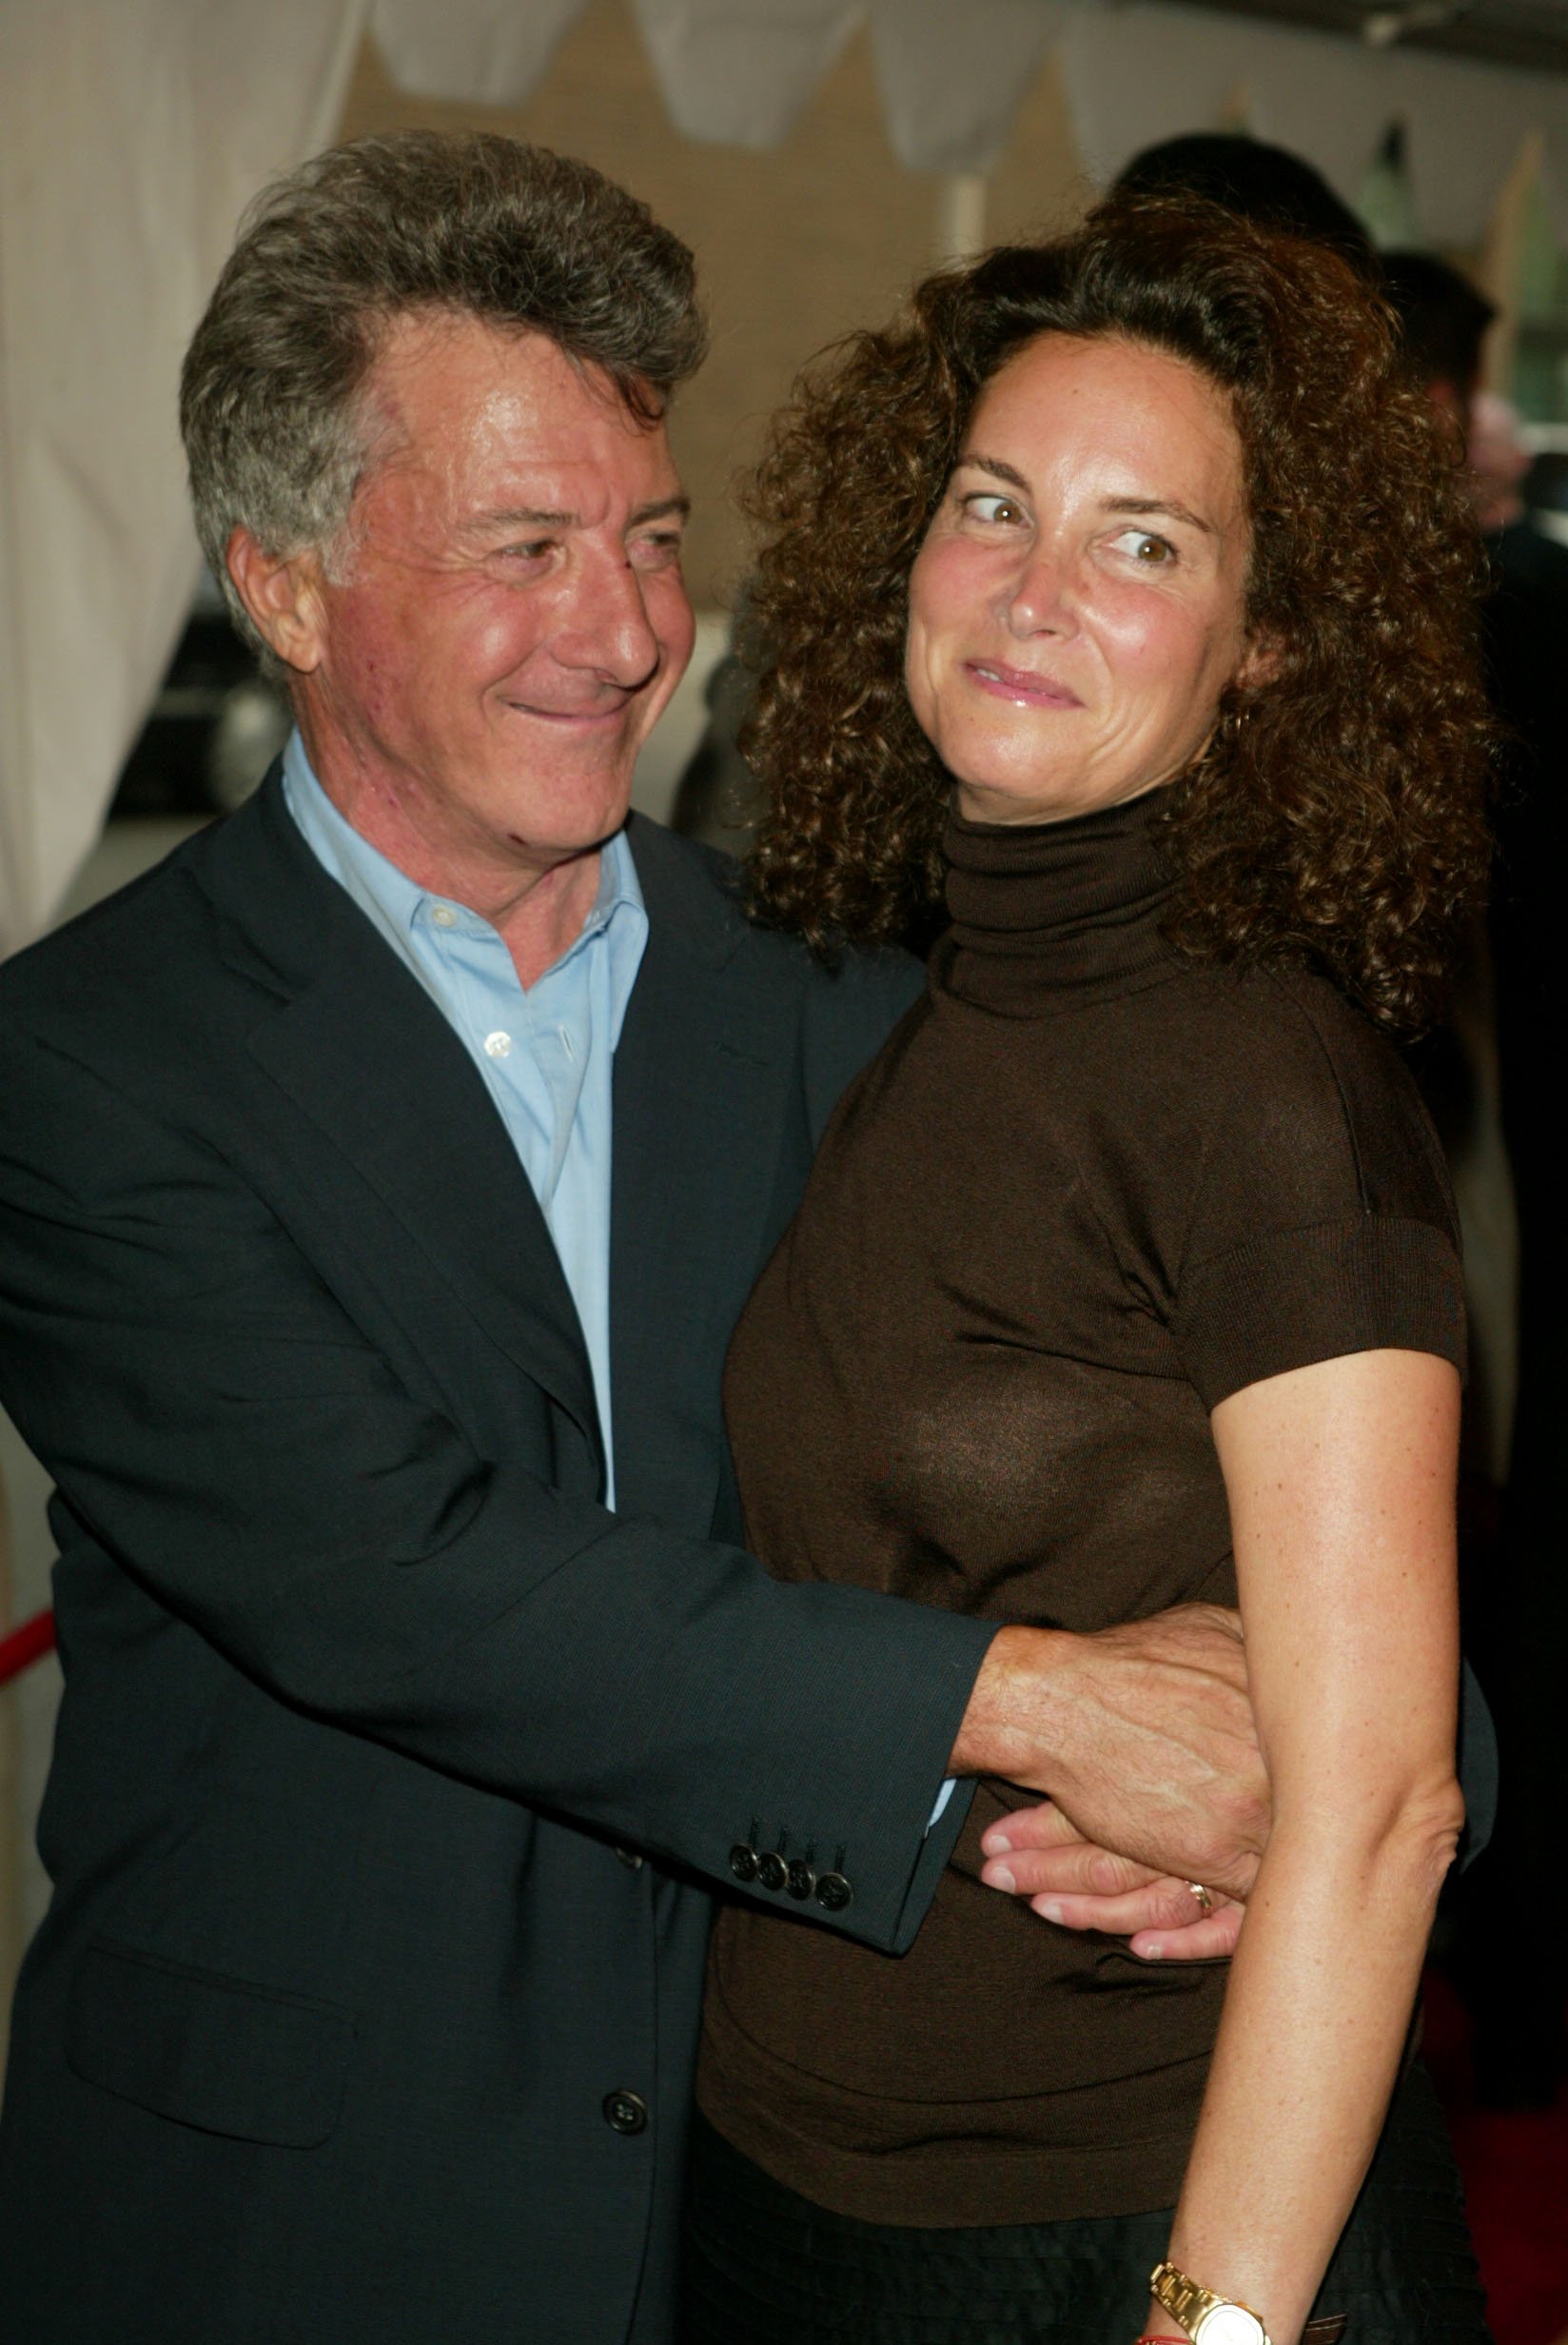 Dustin Hoffman with wife Lisa arriving at the 